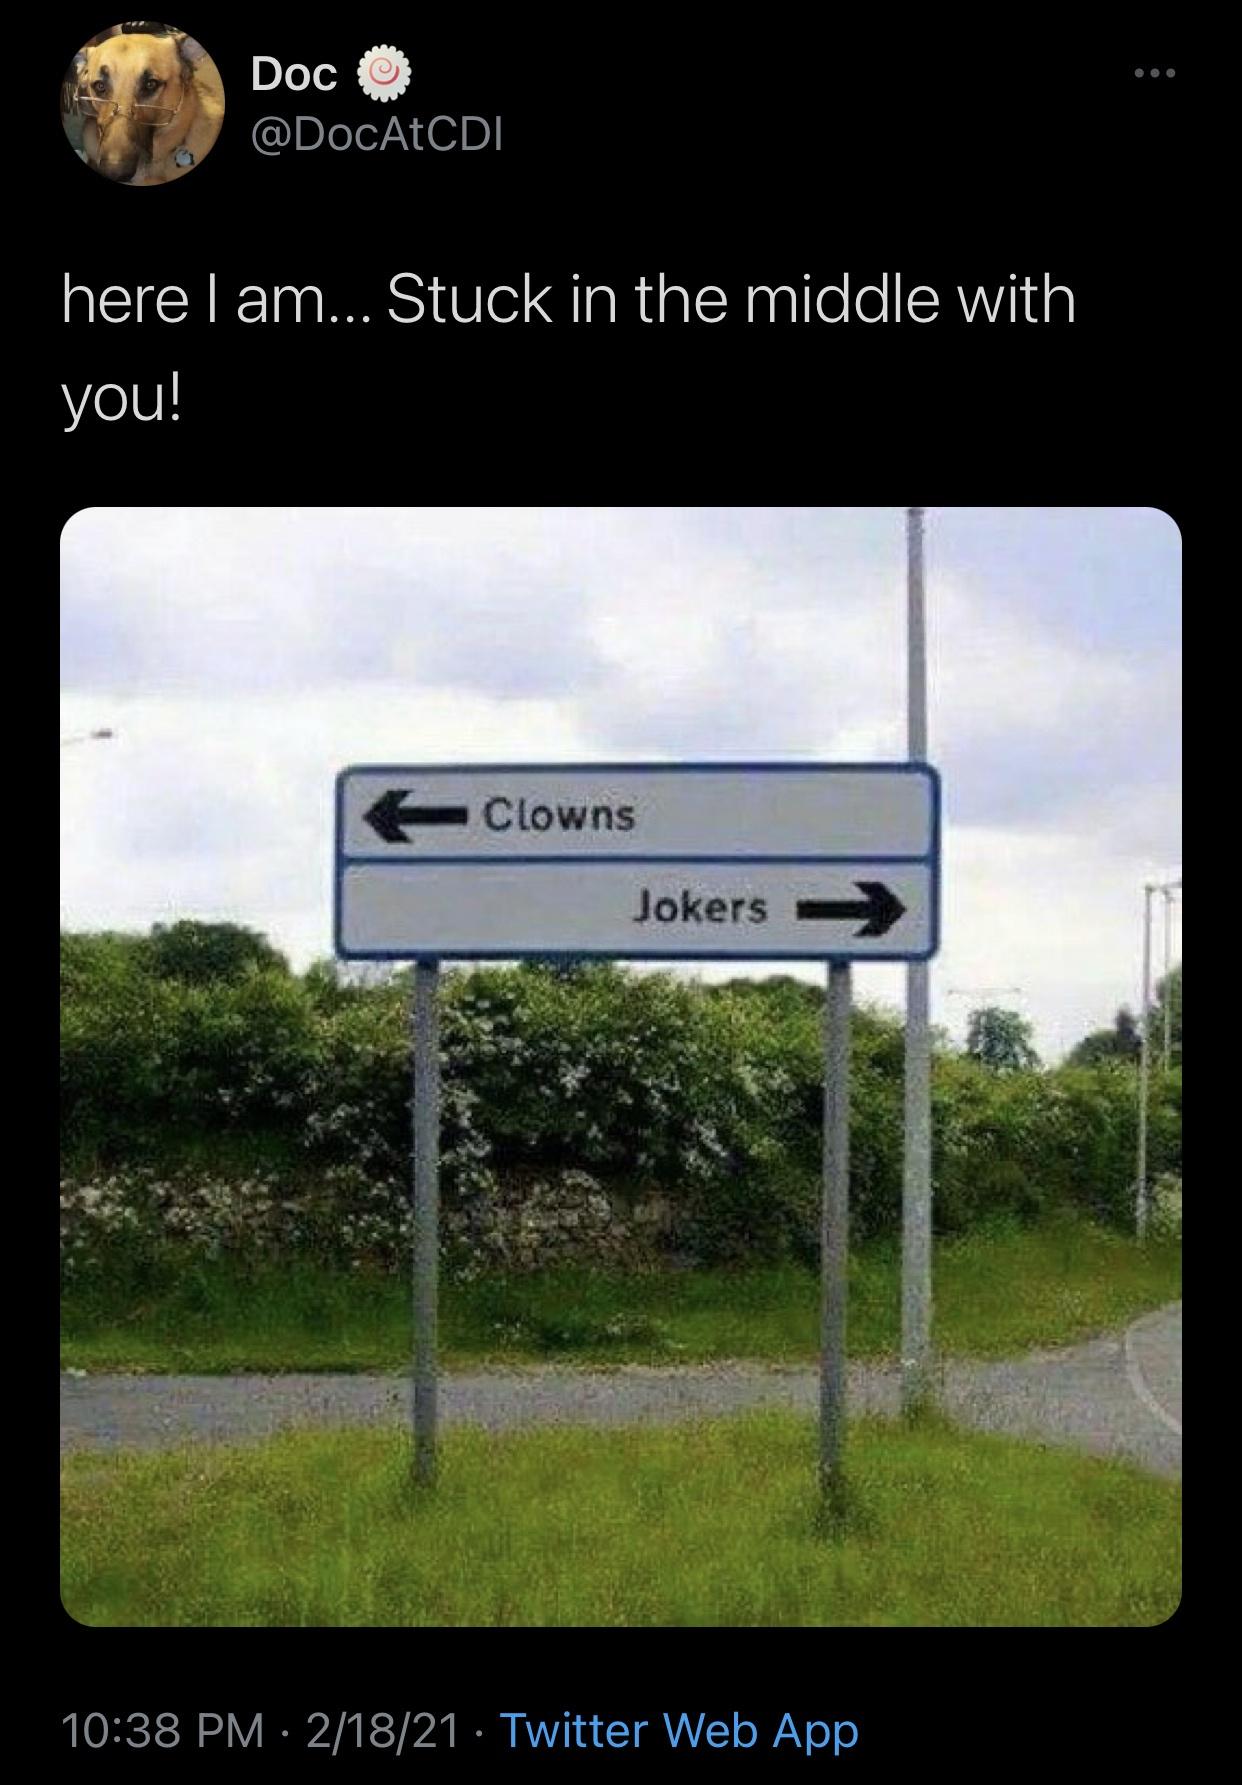 funny pictures of stuck in the middle - Doc here I am... Stuck in the middle with you! Clowns Jokers 21821 Twitter Web App